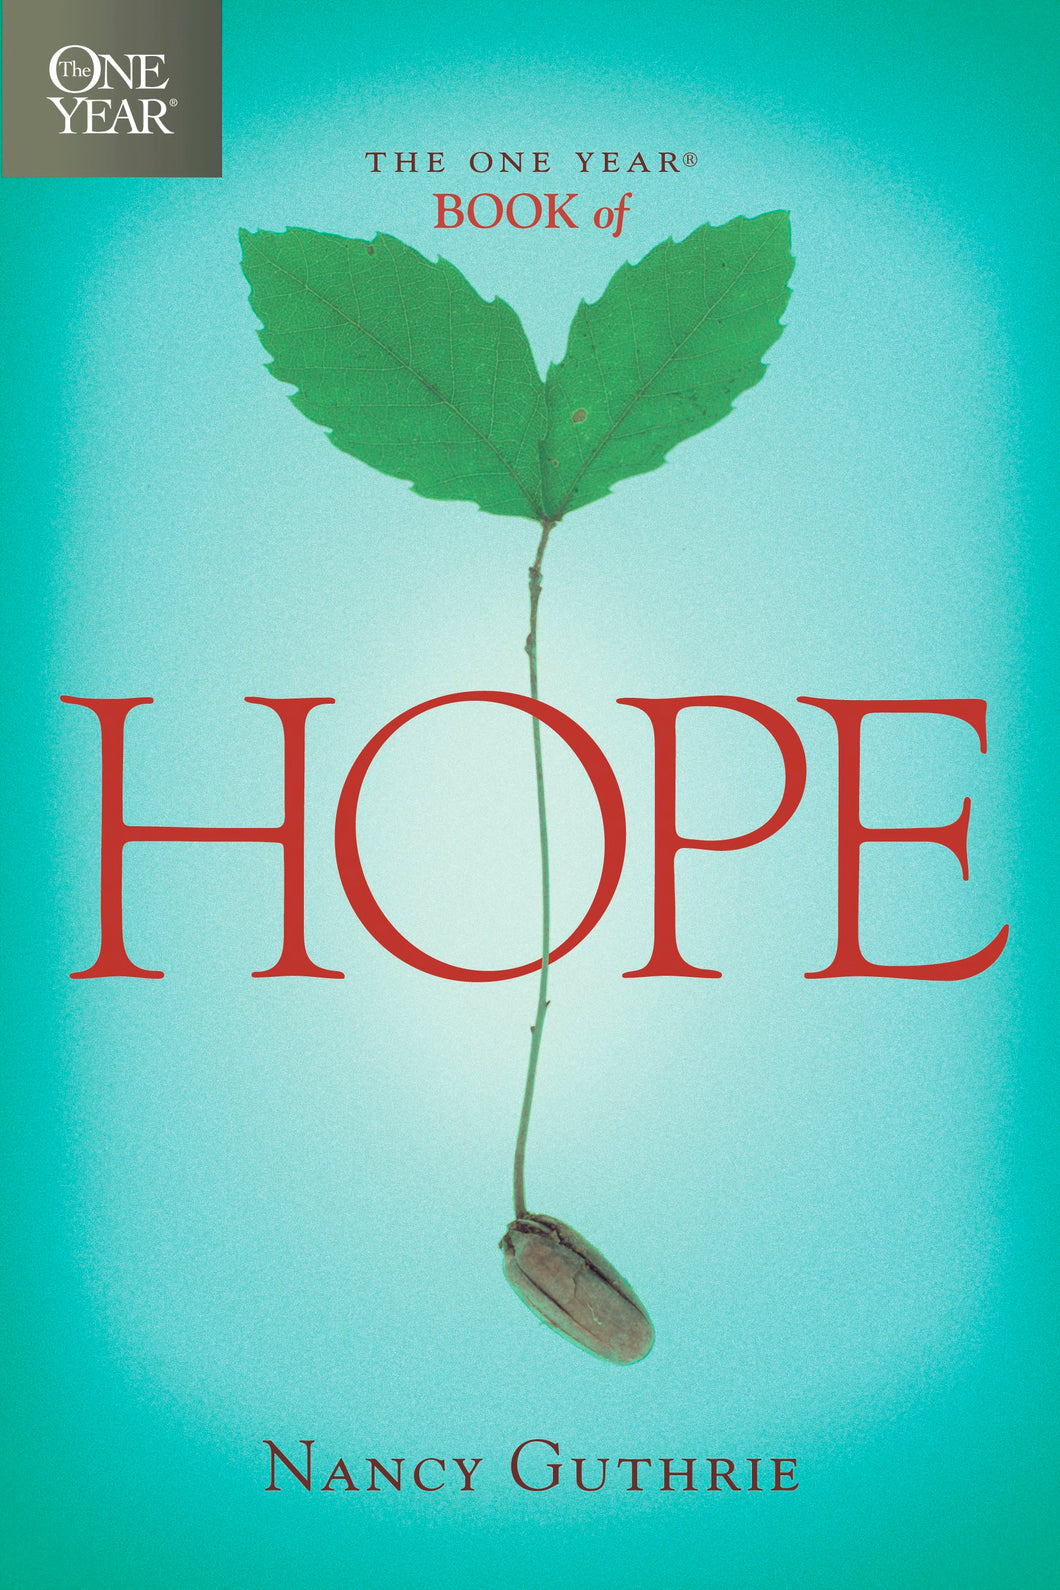 The One Year Book Of Hope